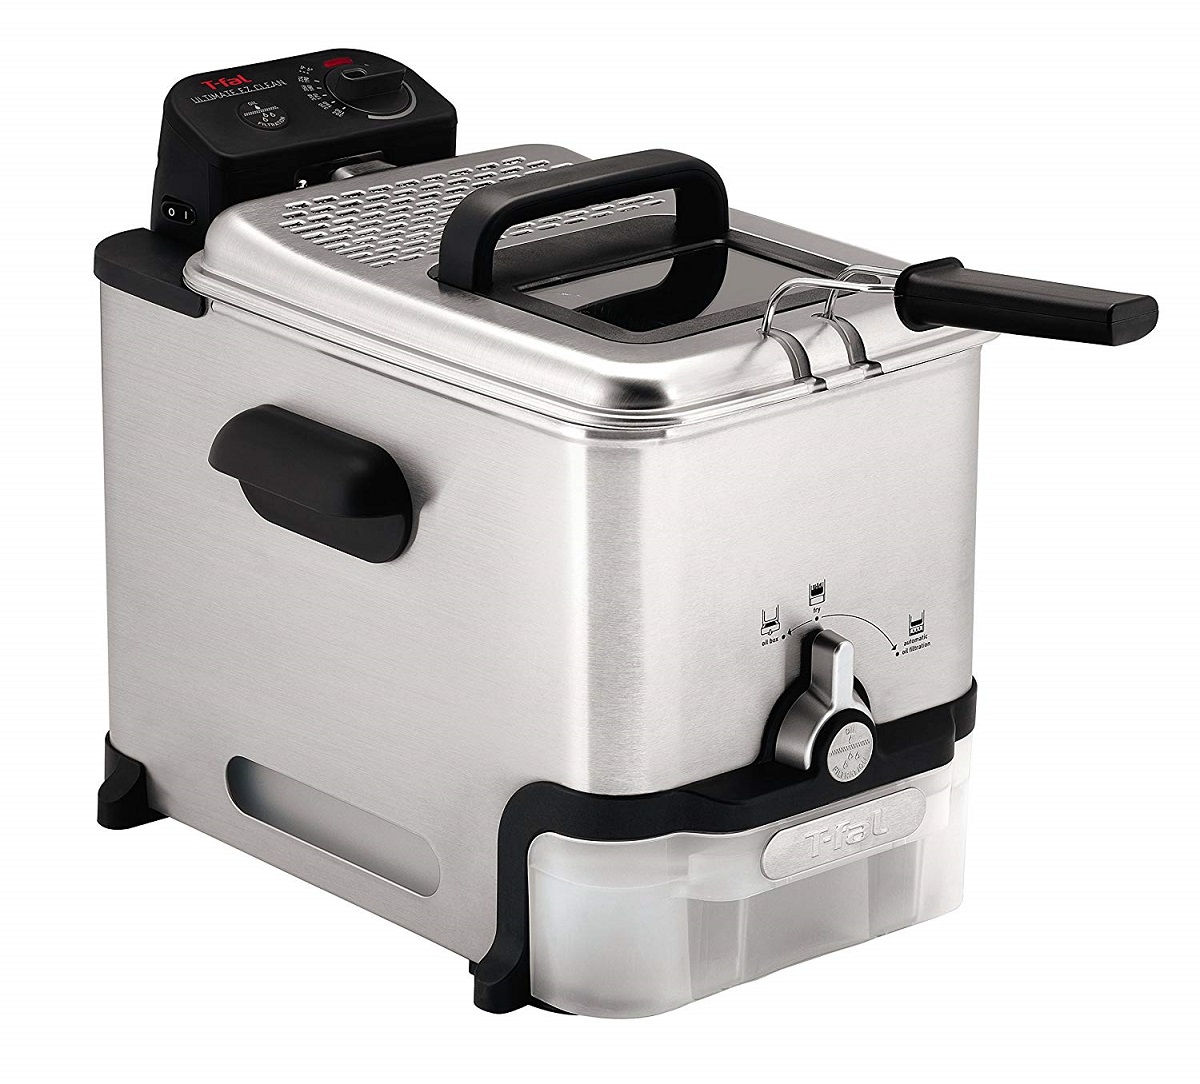 https://movietvtechgeeks.com/wp-content/uploads/2019/11/T-fal-Deep-Fryer-with-Basket-2019-hottest-holiday-kitchen-cooking-gifts.jpg